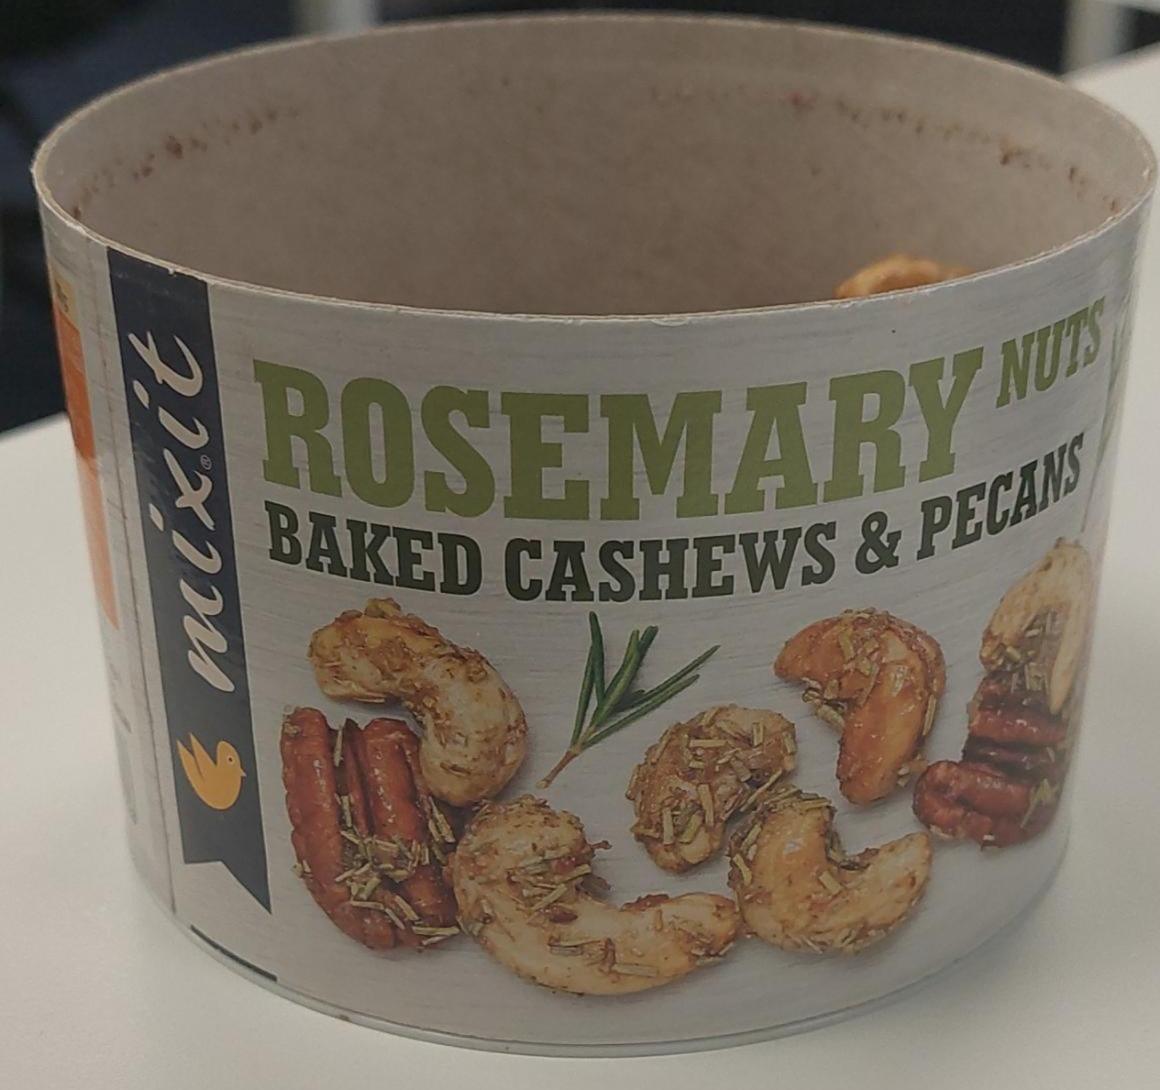 Fotografie - Rosemary nuts baked cashews & pecans Mixit